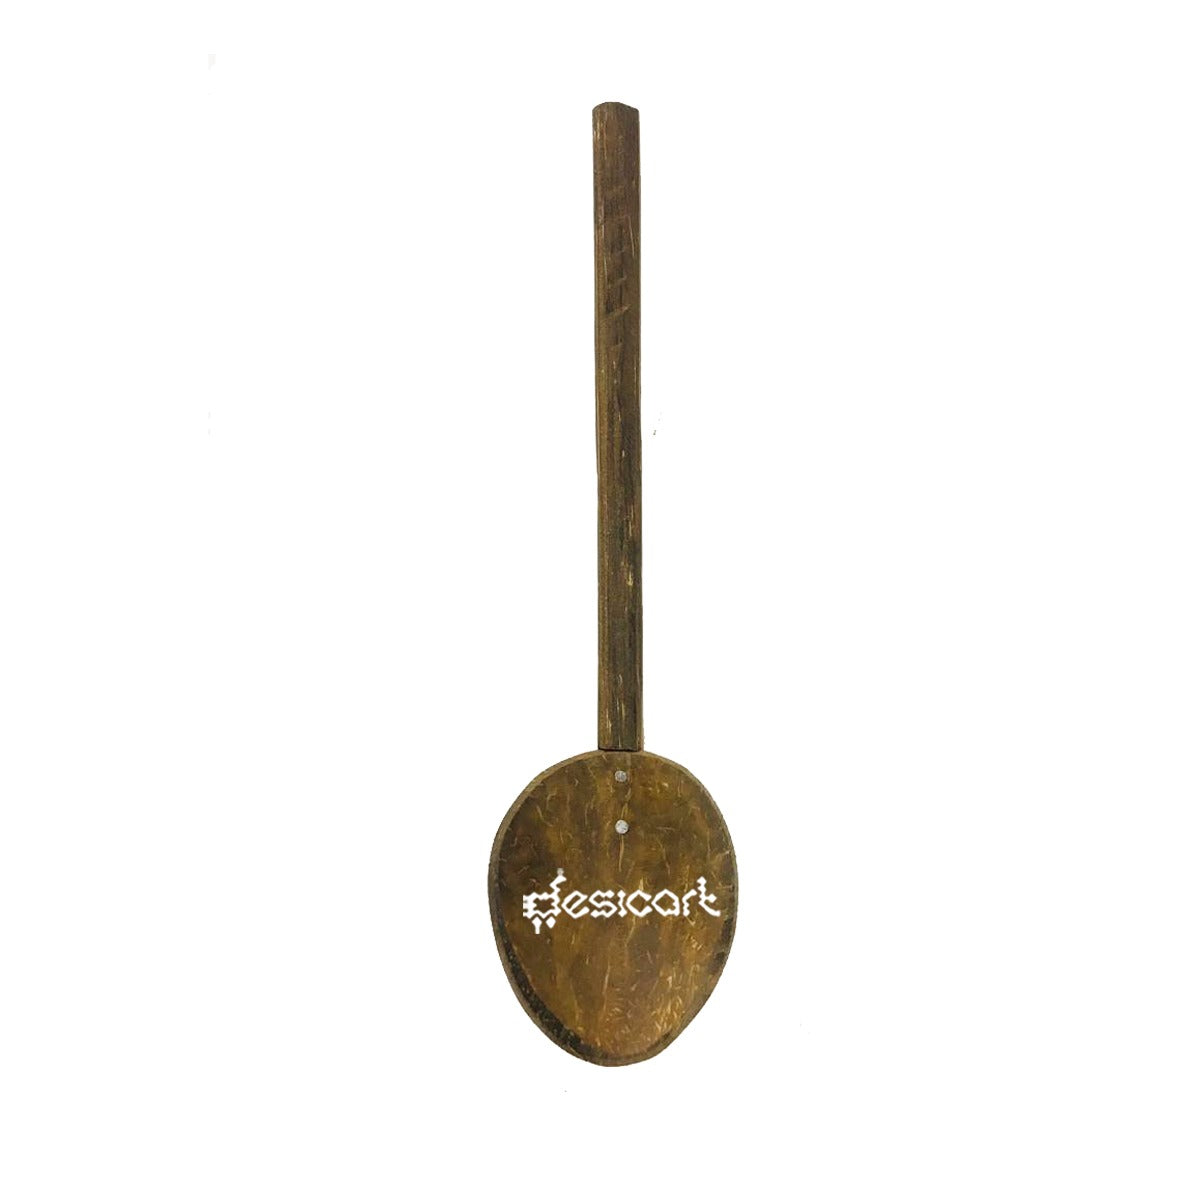 TRADITIONAL COOCONUT SPOON 6"